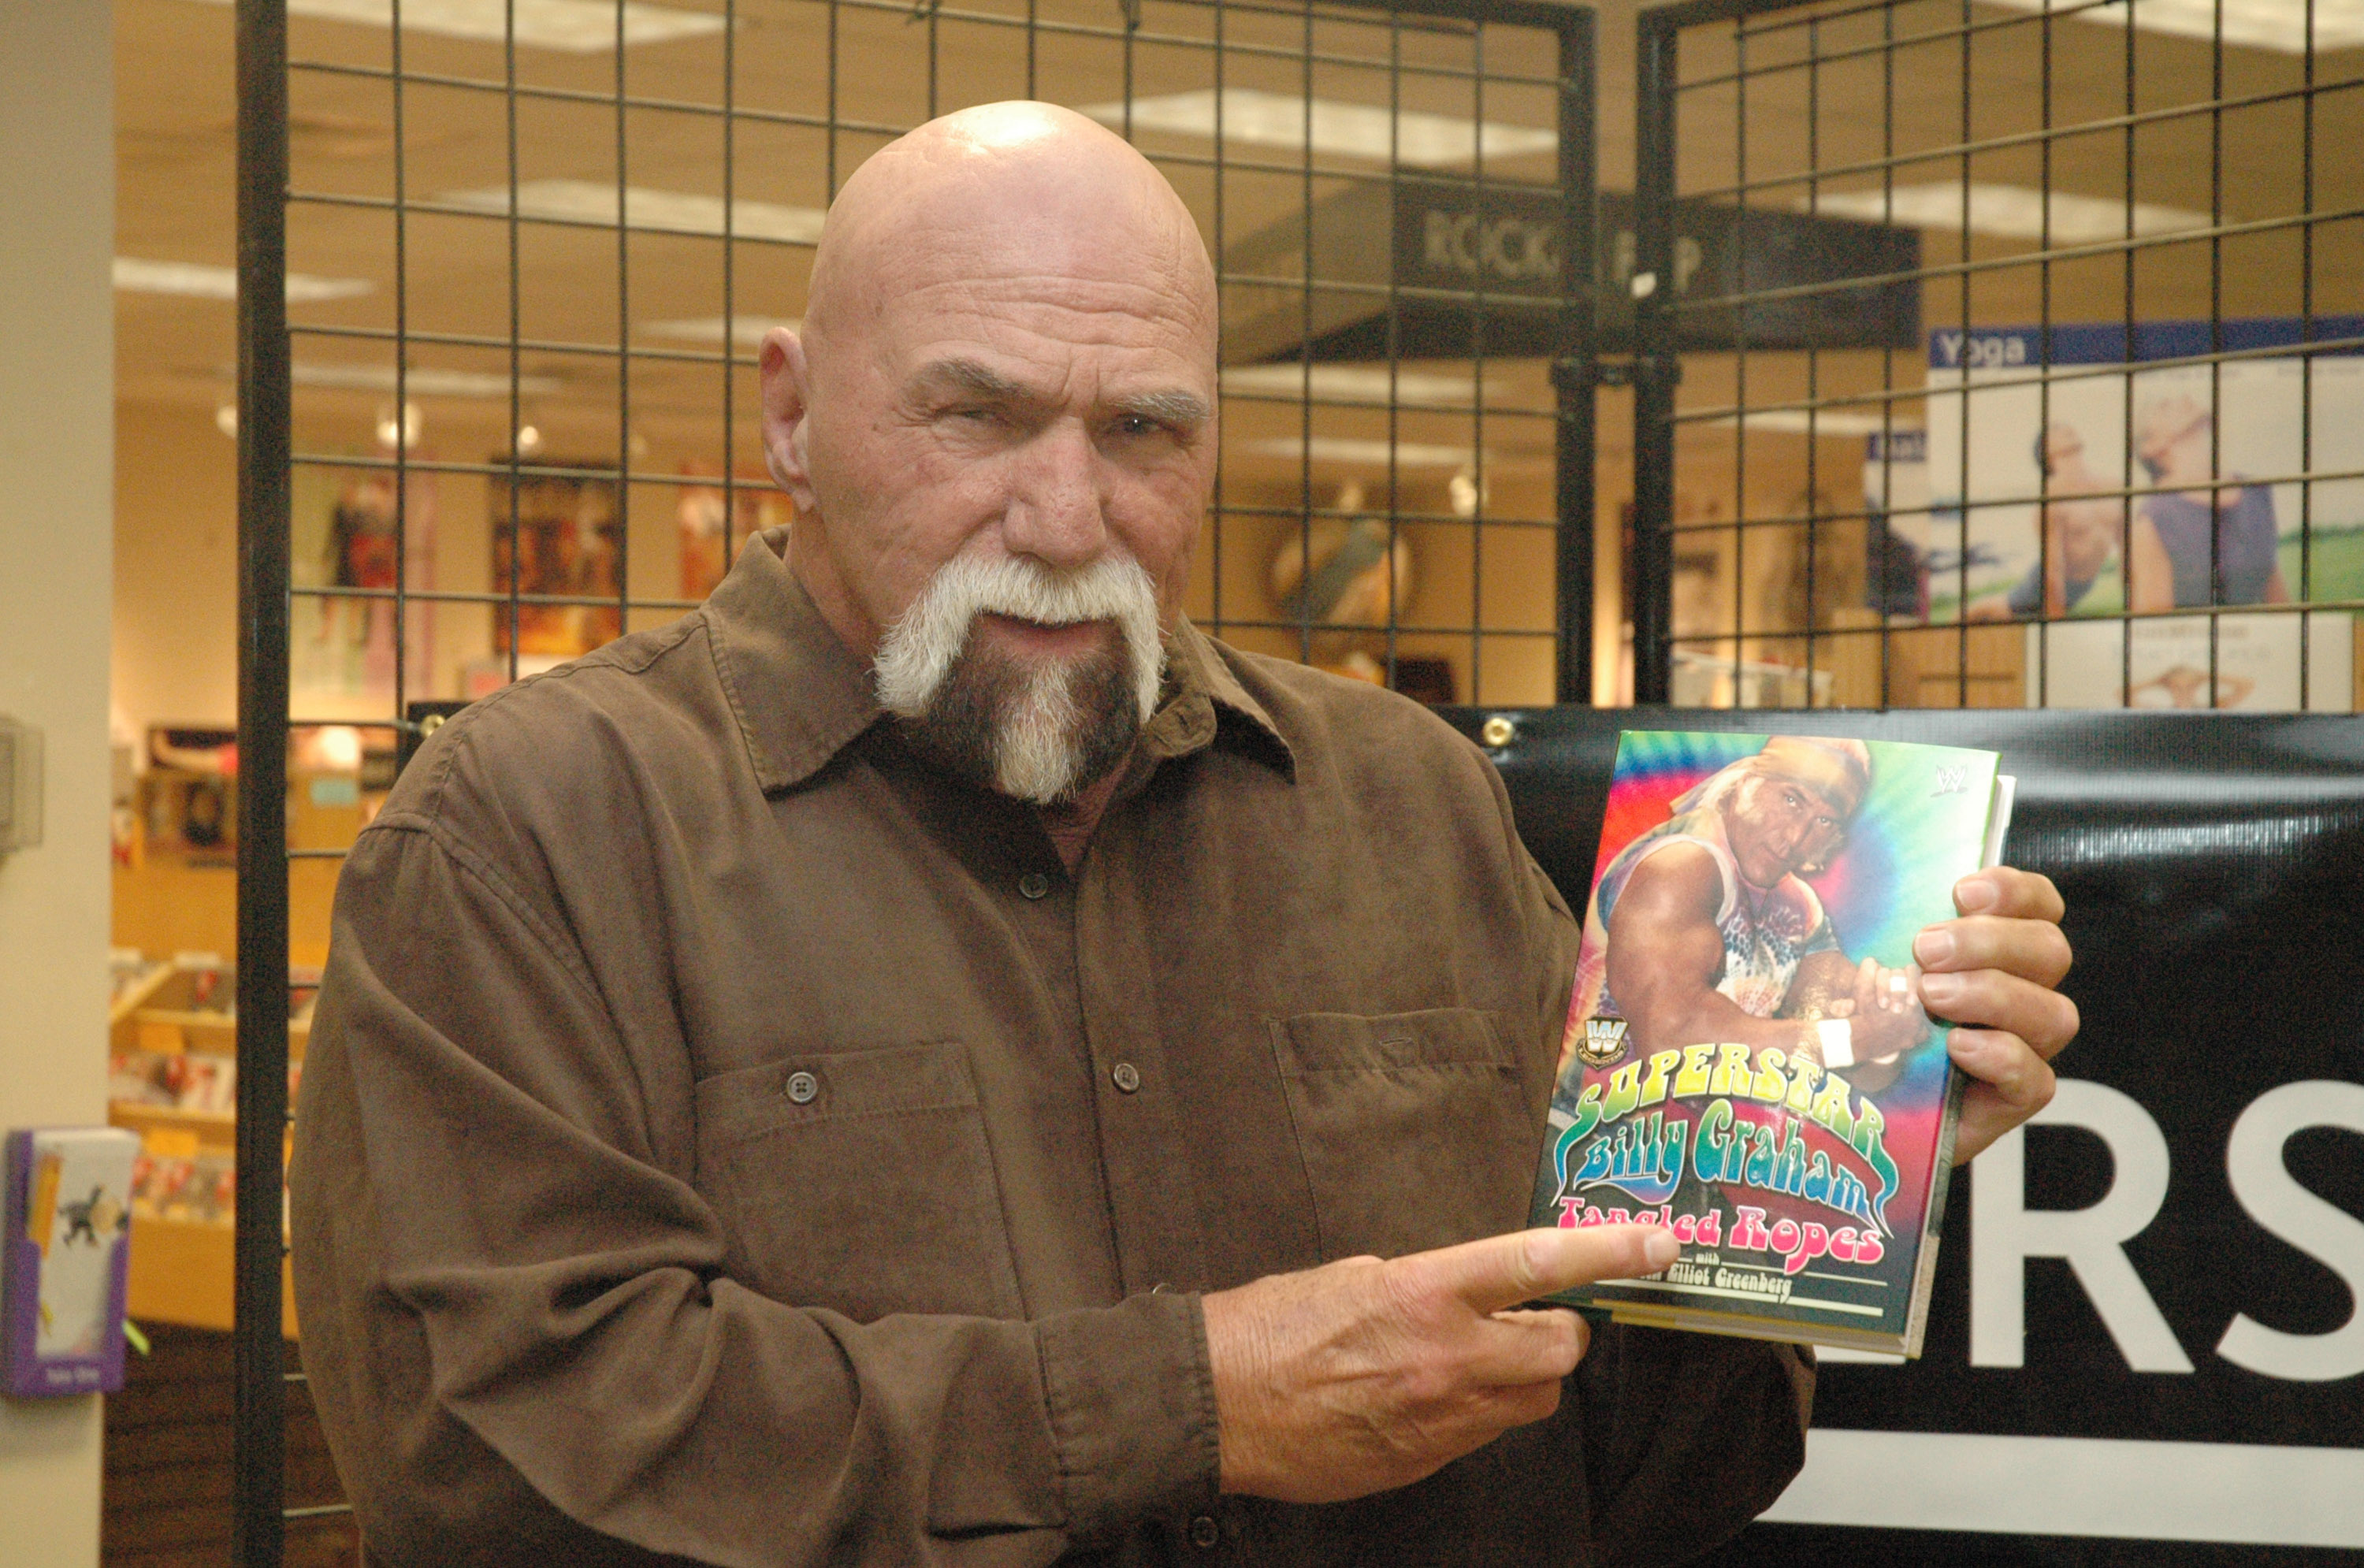 Superstar Billy Graham Signs His Book “Tangled Ropes” at Borders in Princeton - February 21, 2006